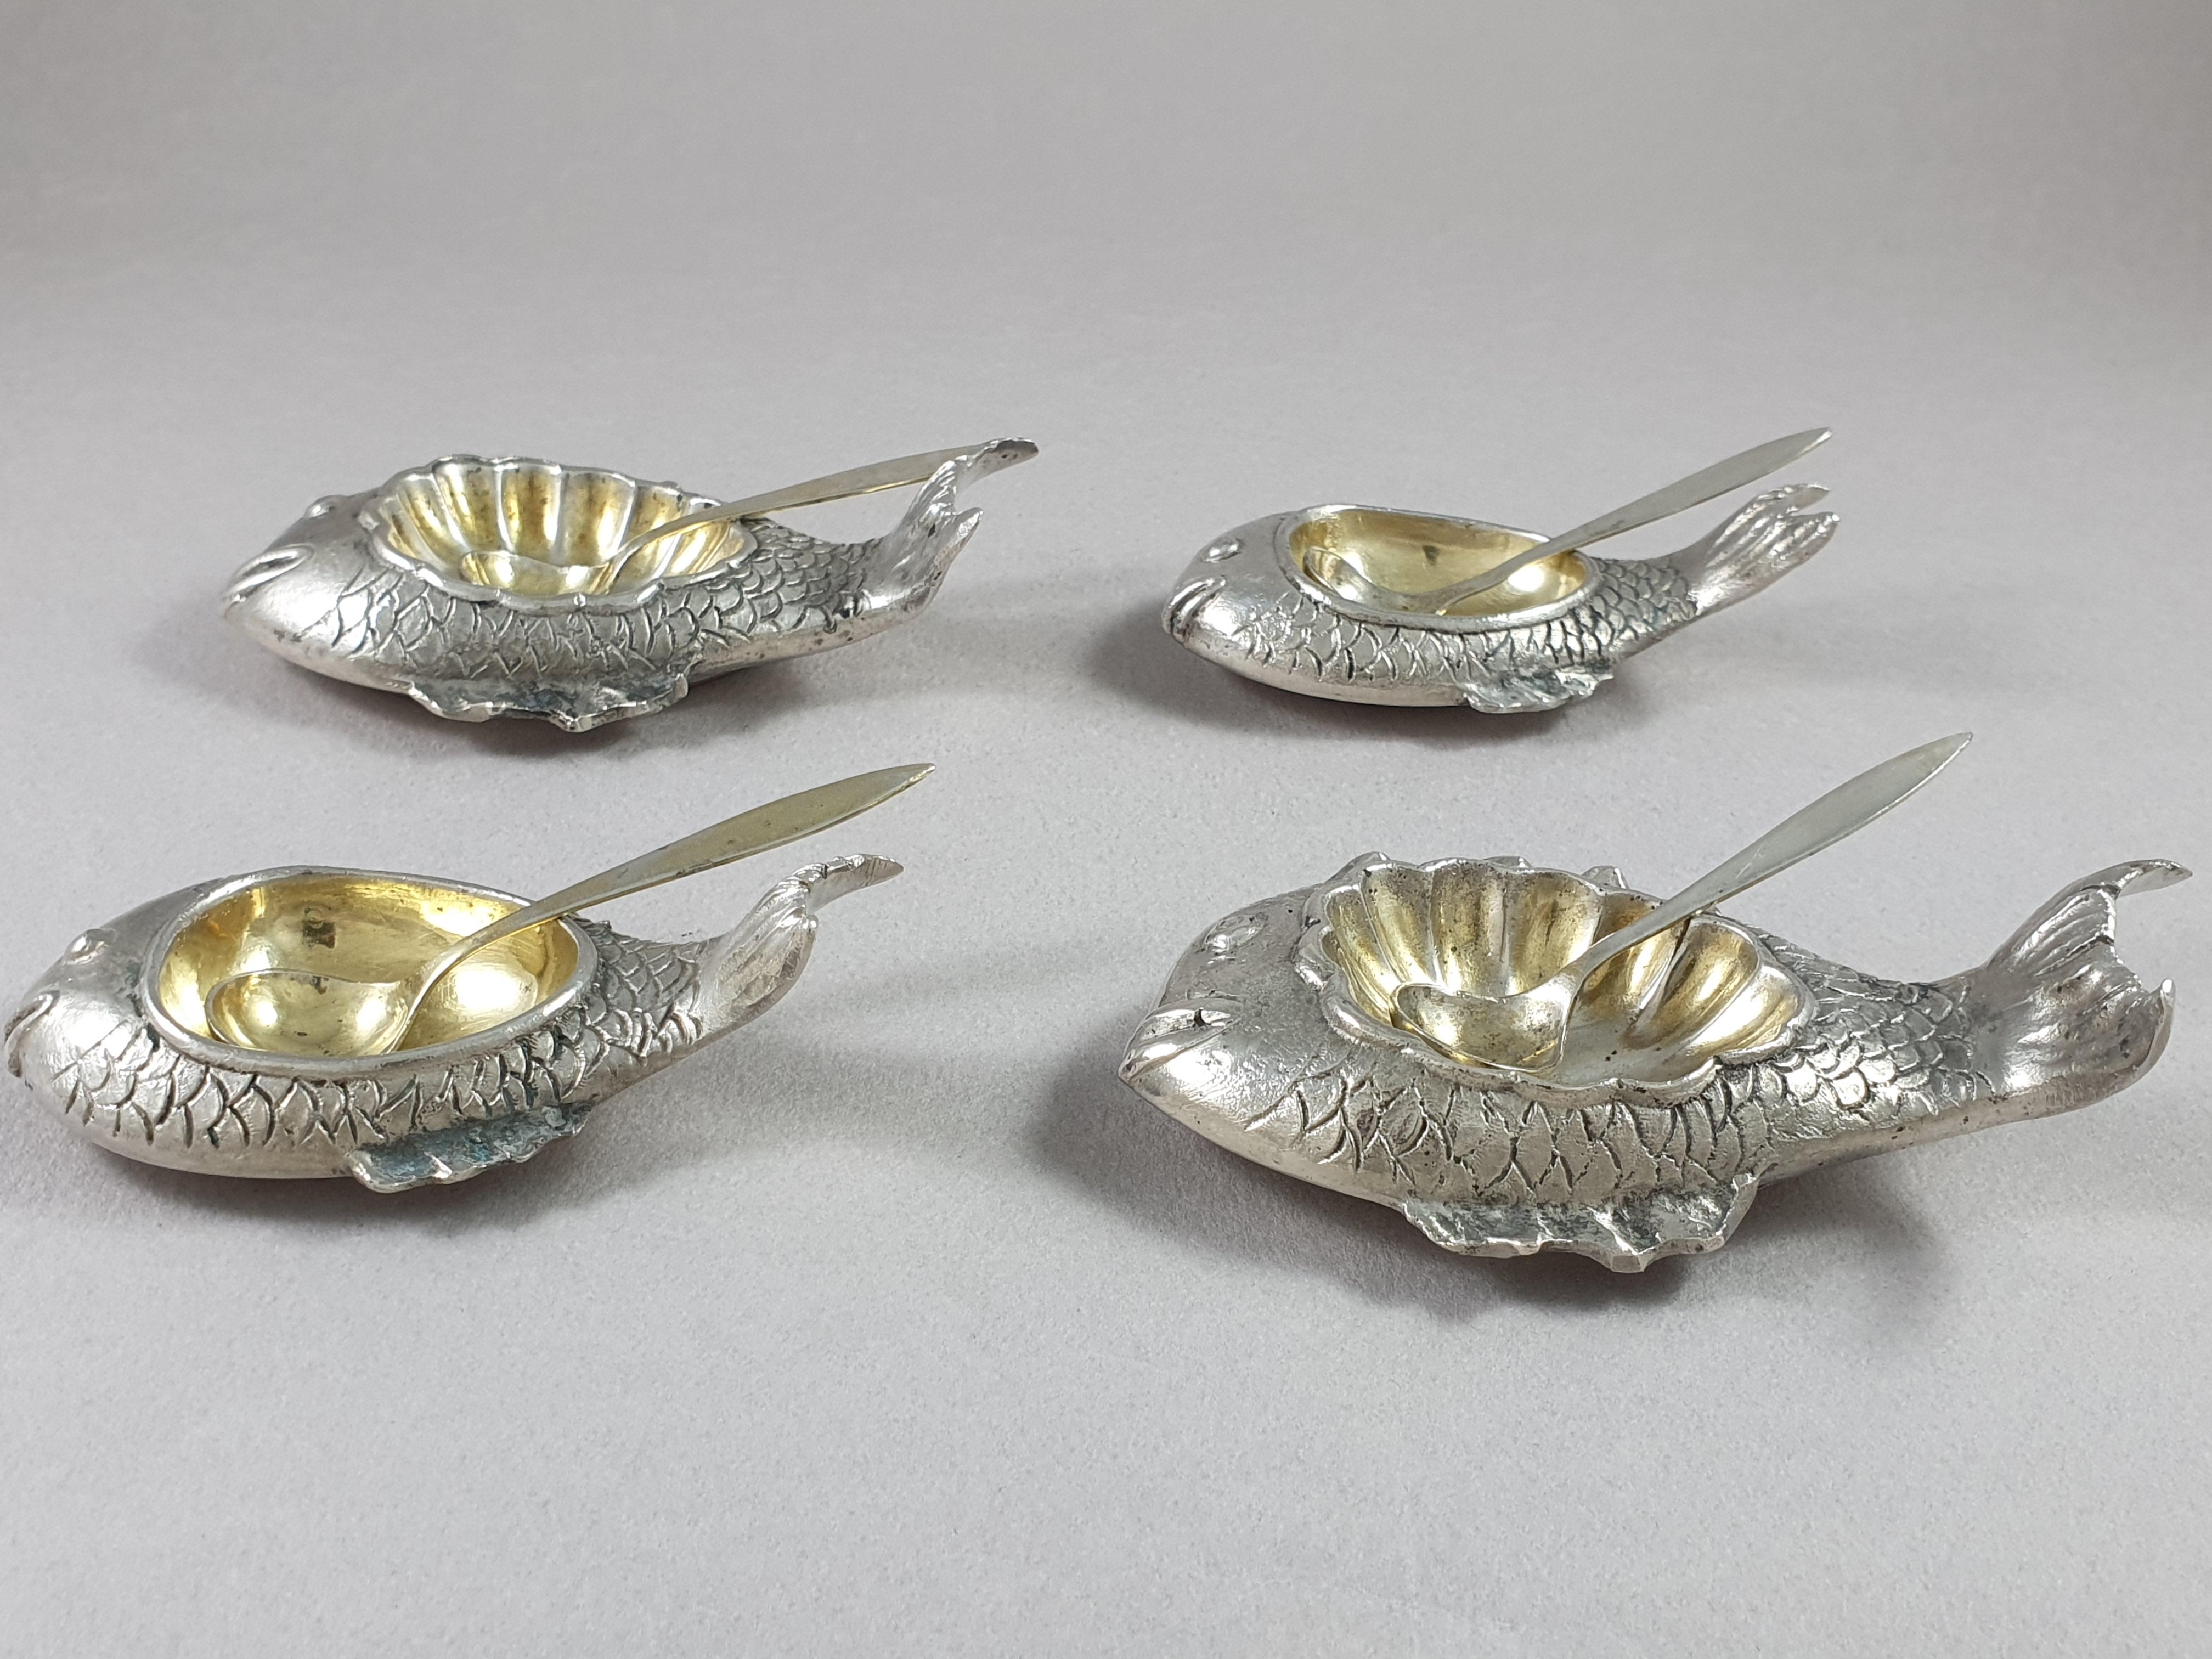 4 salt and pepper shakers in solid silver and gilt In the shape of a fish 

Italian work of the 20th century 

Measures: Length: 6.8 and 8 cm 
Shovels: 6.3 cm 
Weight: 346 grams.
 